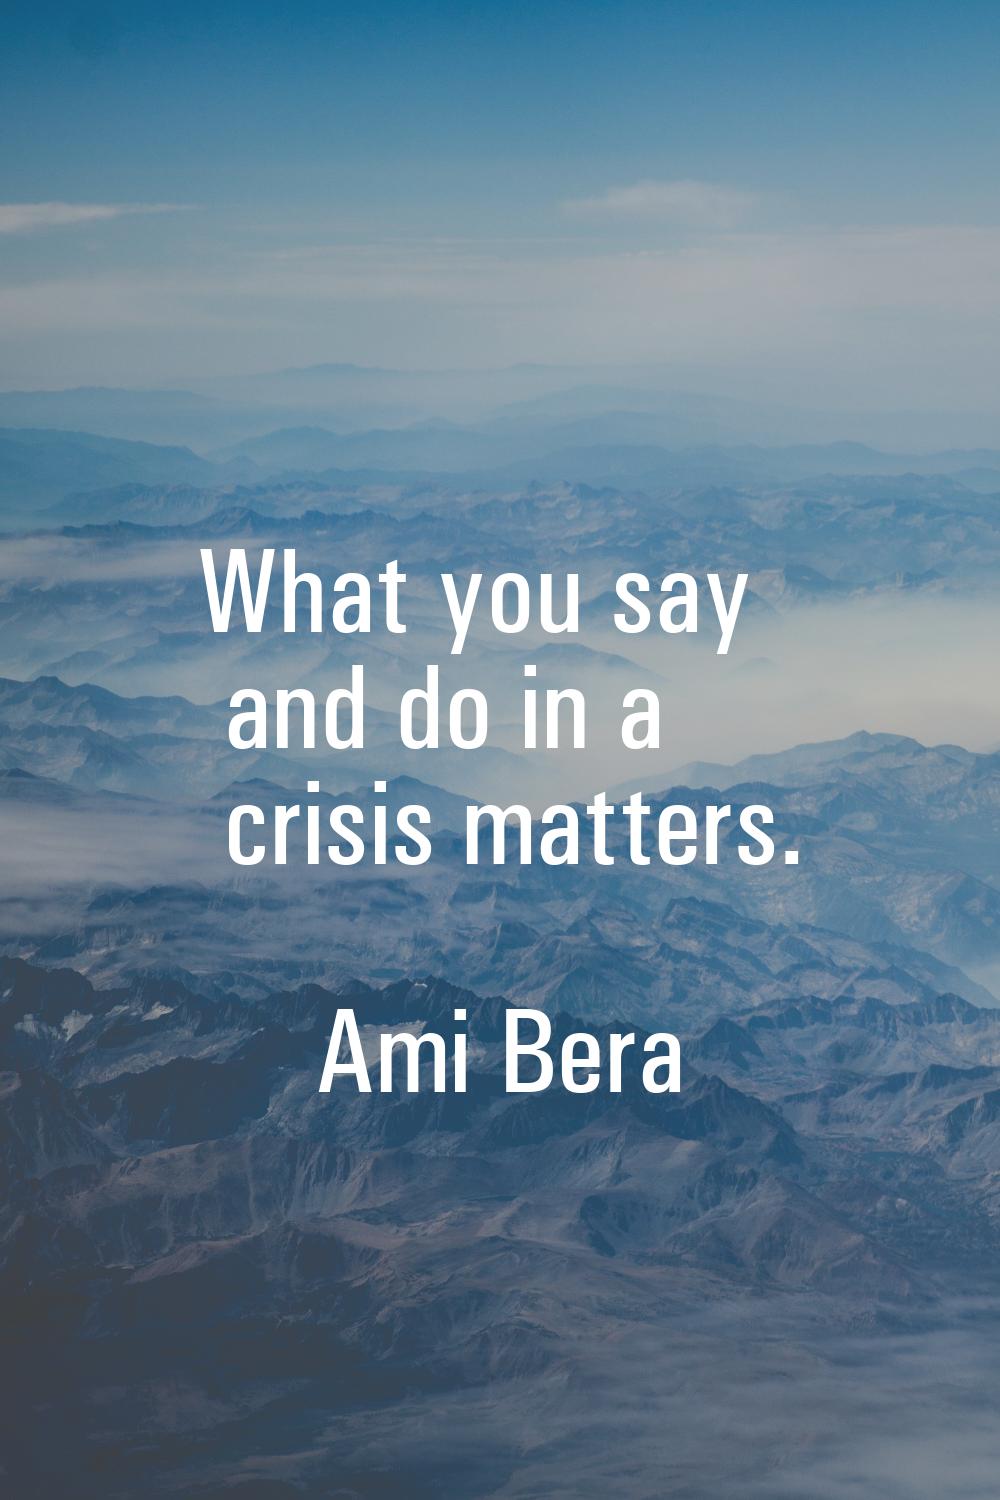 What you say and do in a crisis matters.